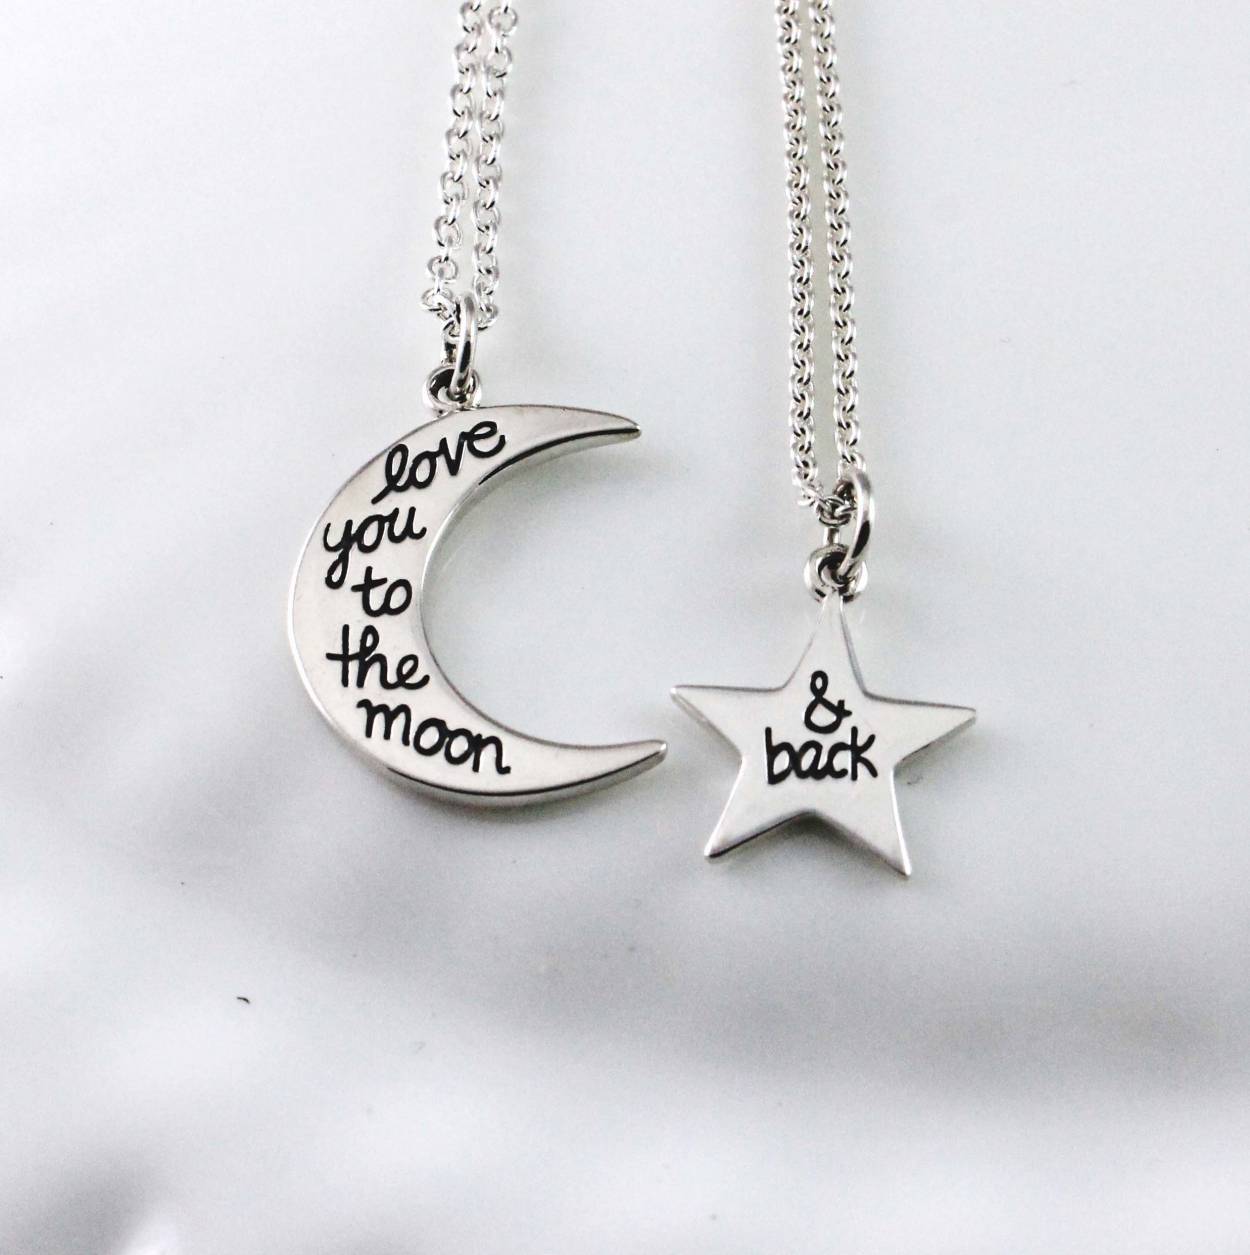 Love You to the Moon and Back Necklace Set